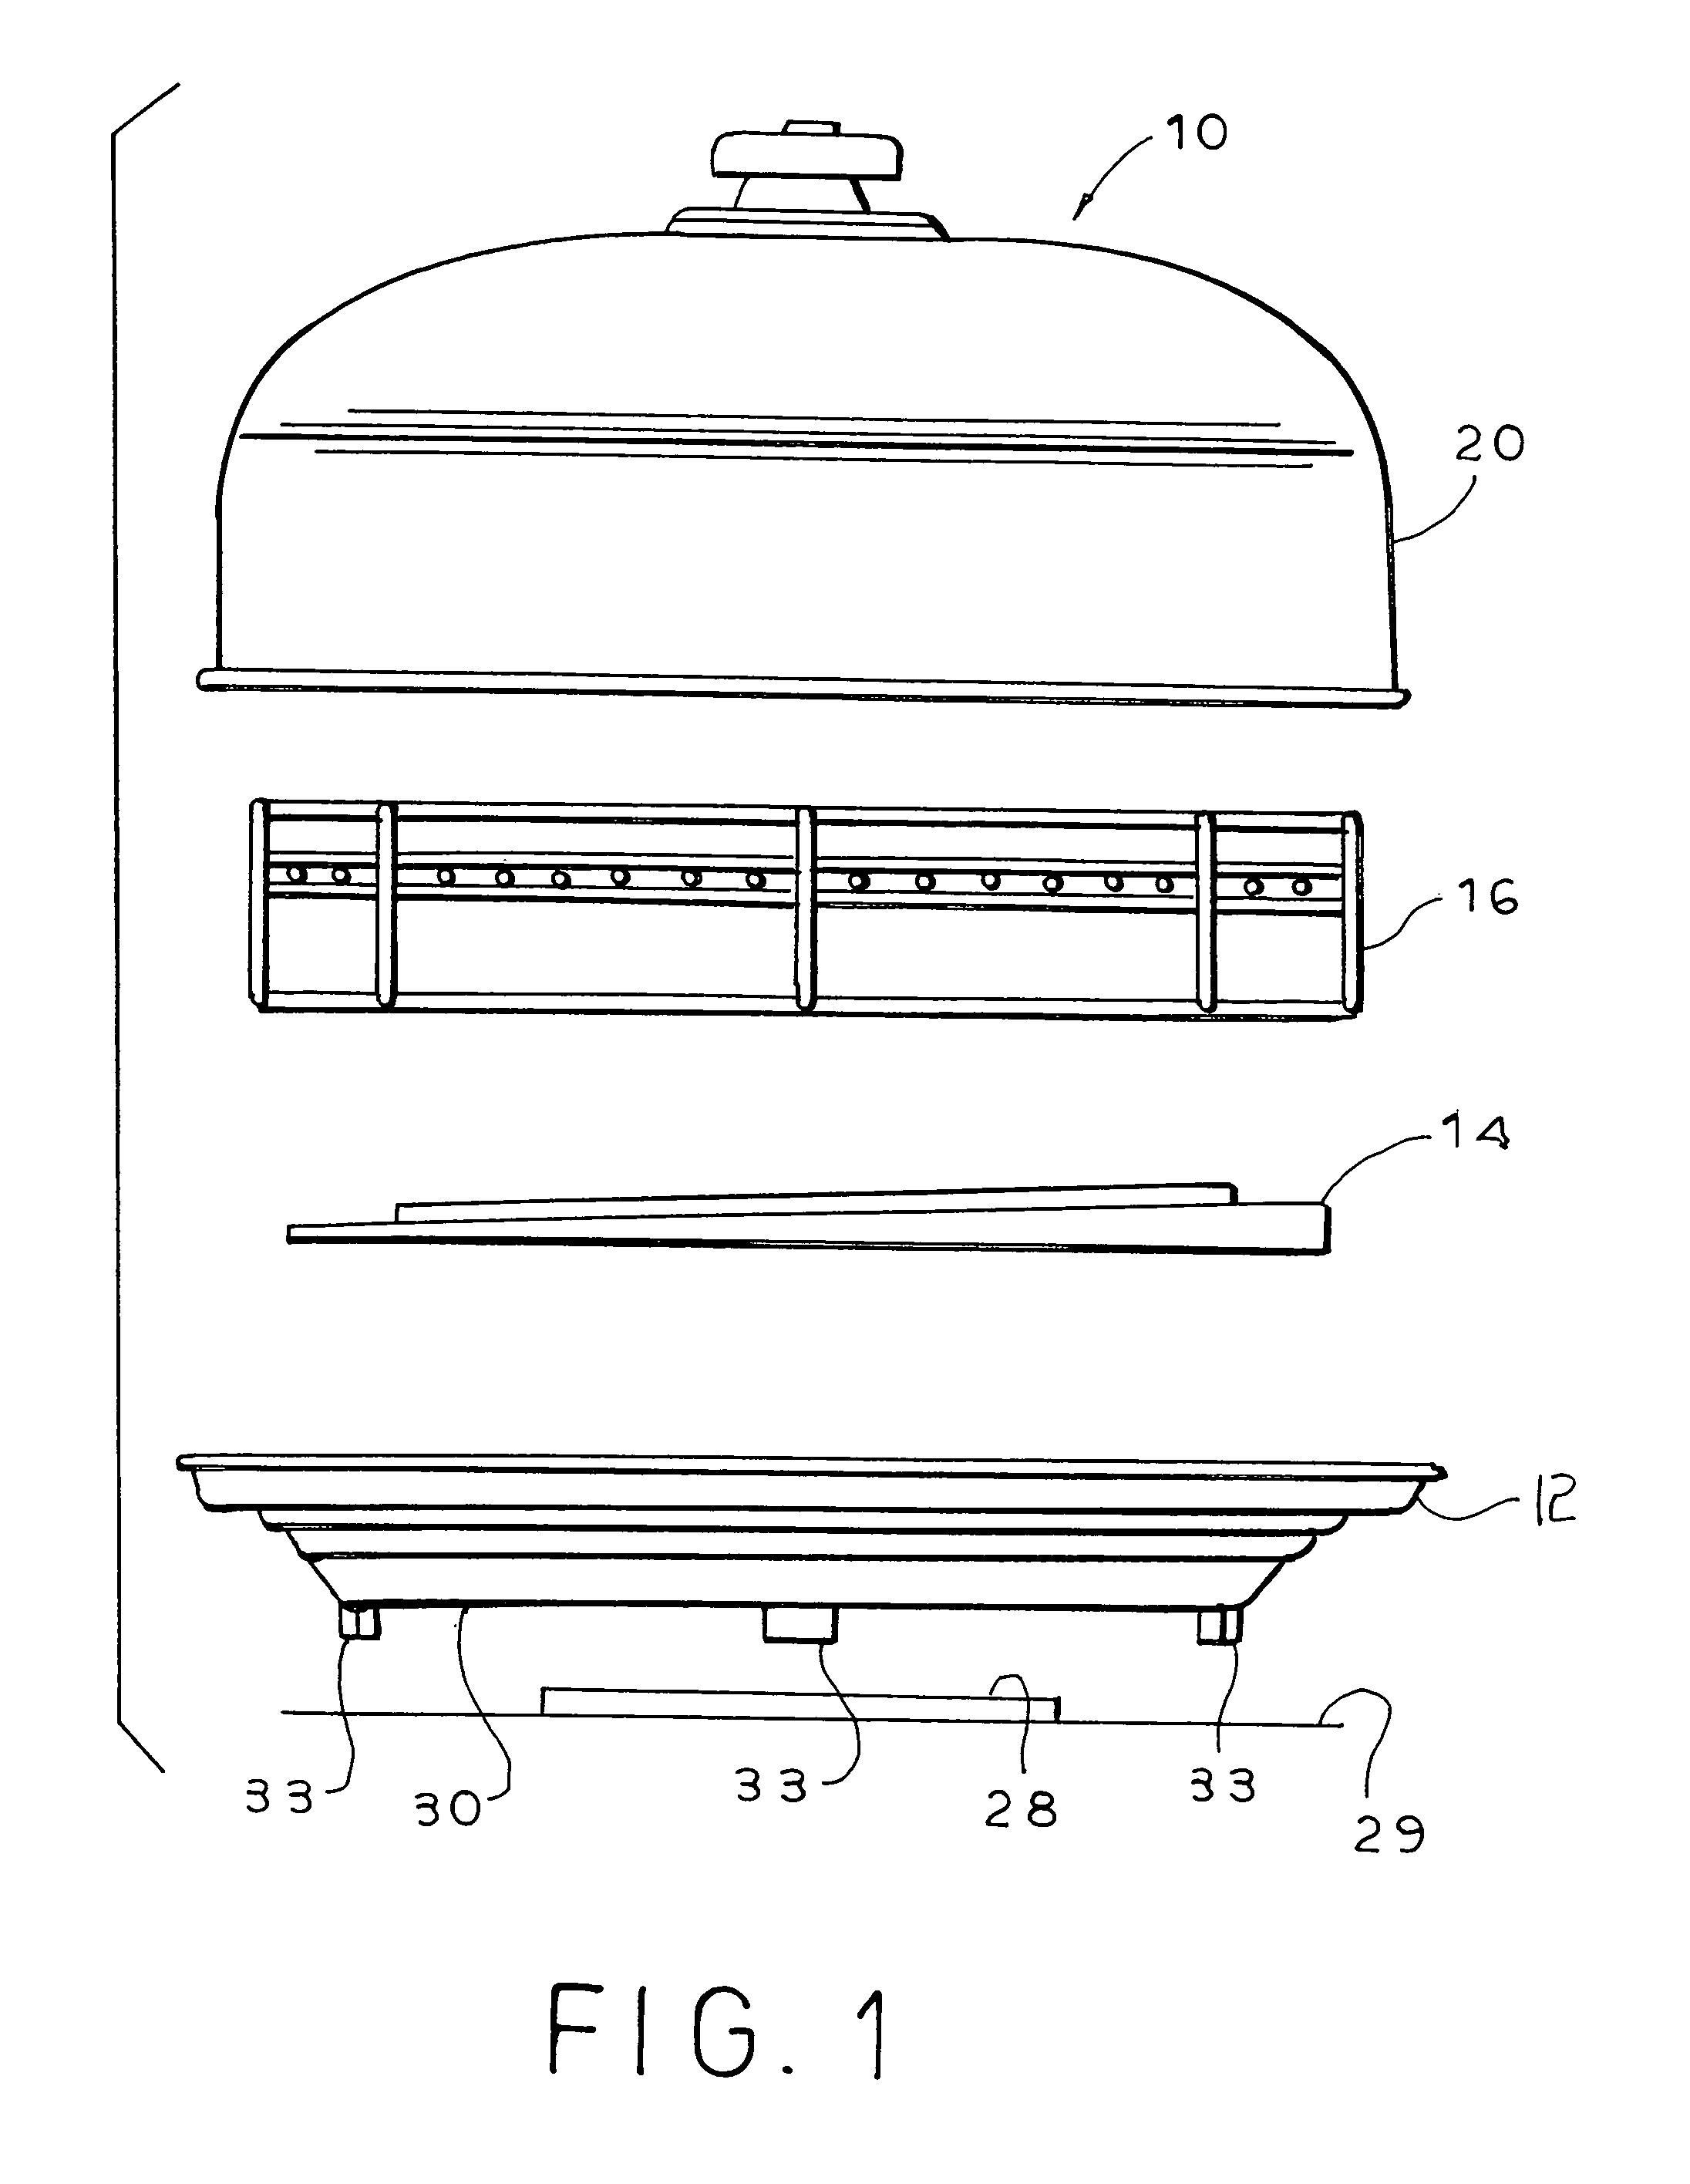 Multi-purpose stovetop grilling and cooking device